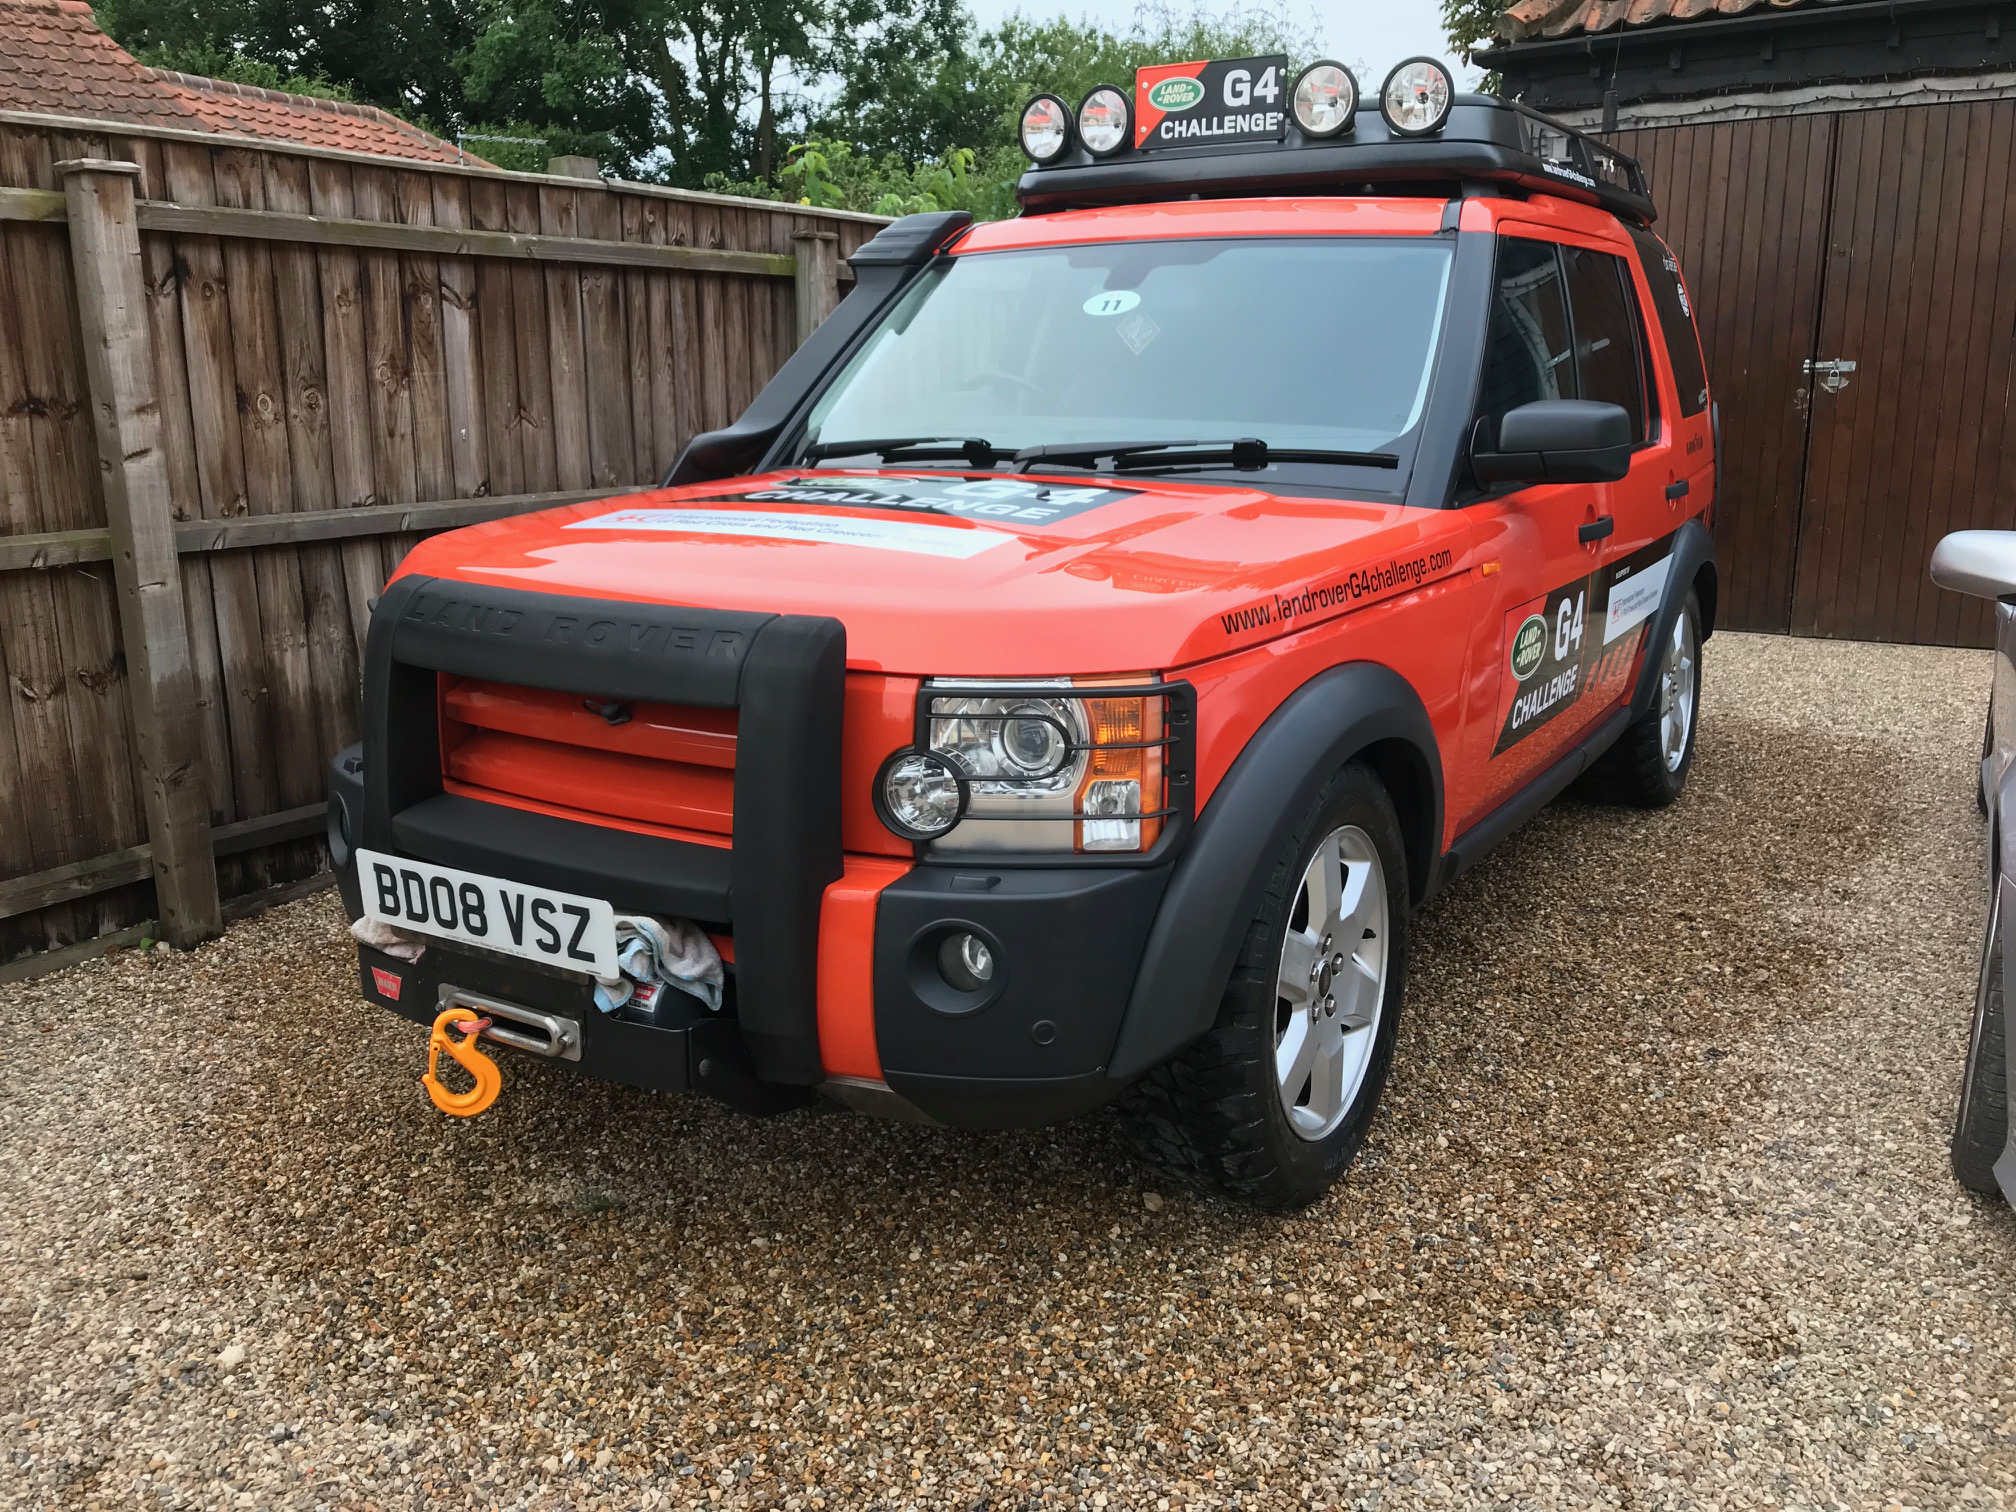 2008 Land Rover Discovery 3 HSE G4 Challenge Edition 2.7